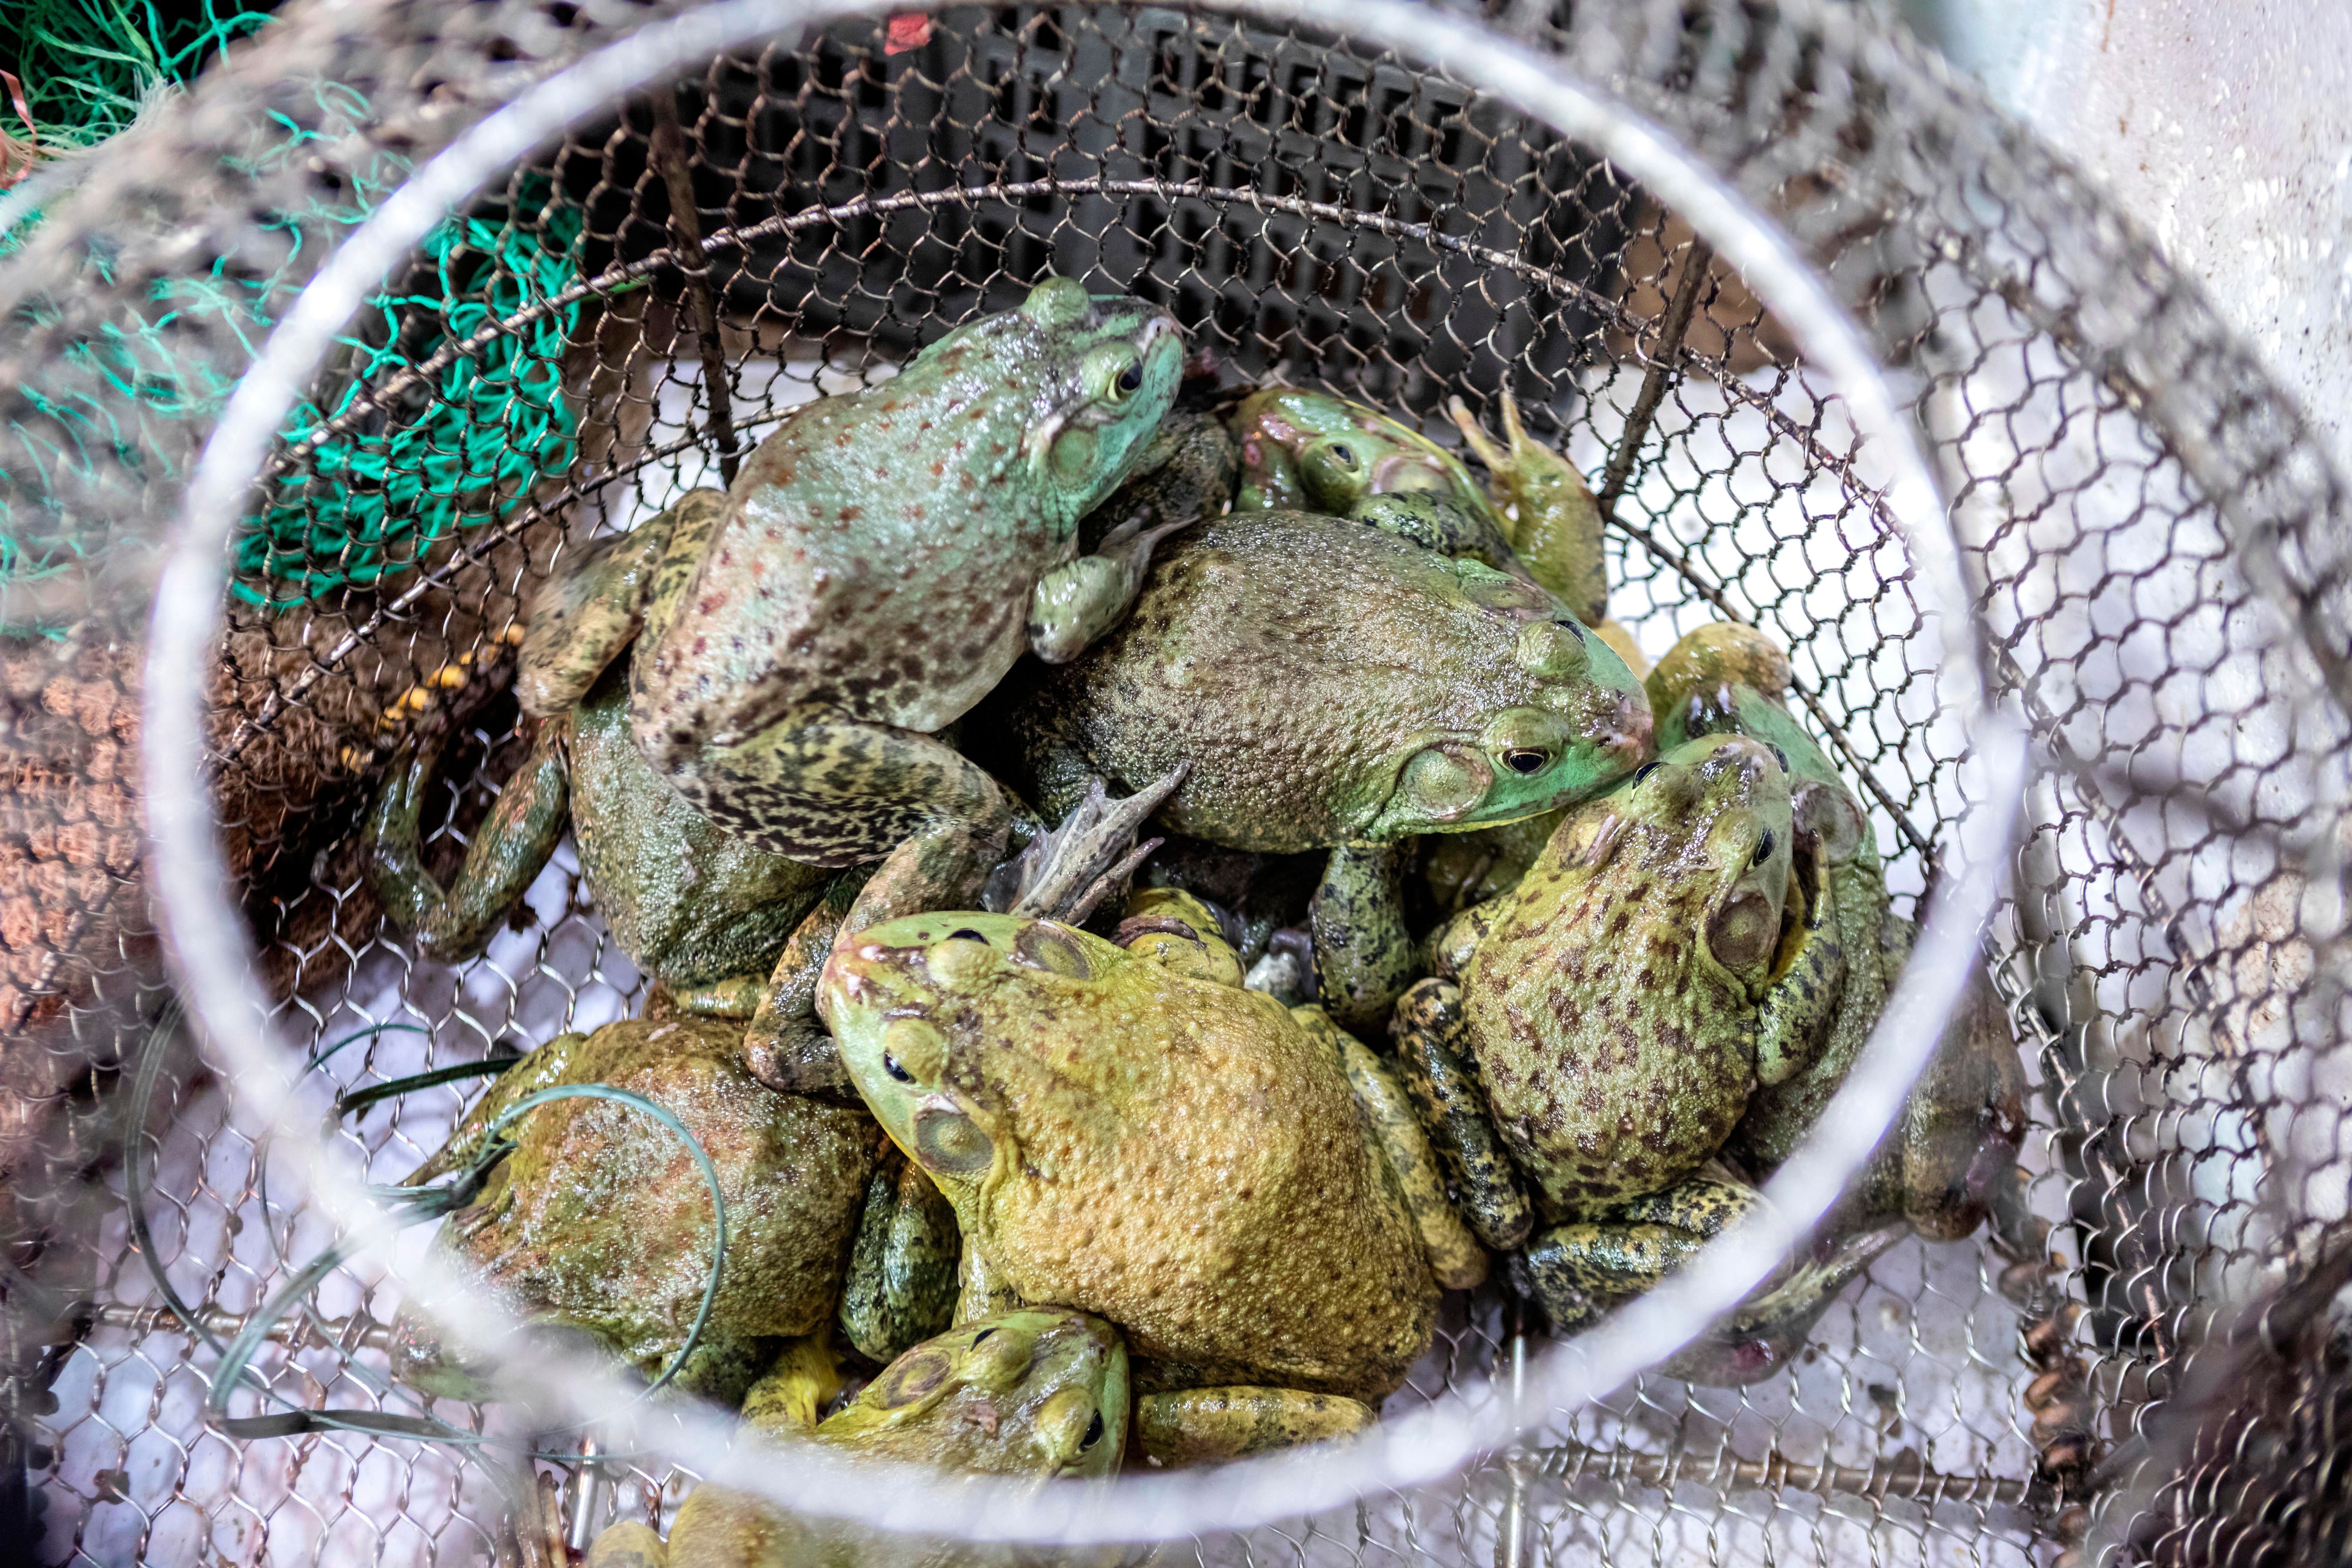 Live frogs for sale.